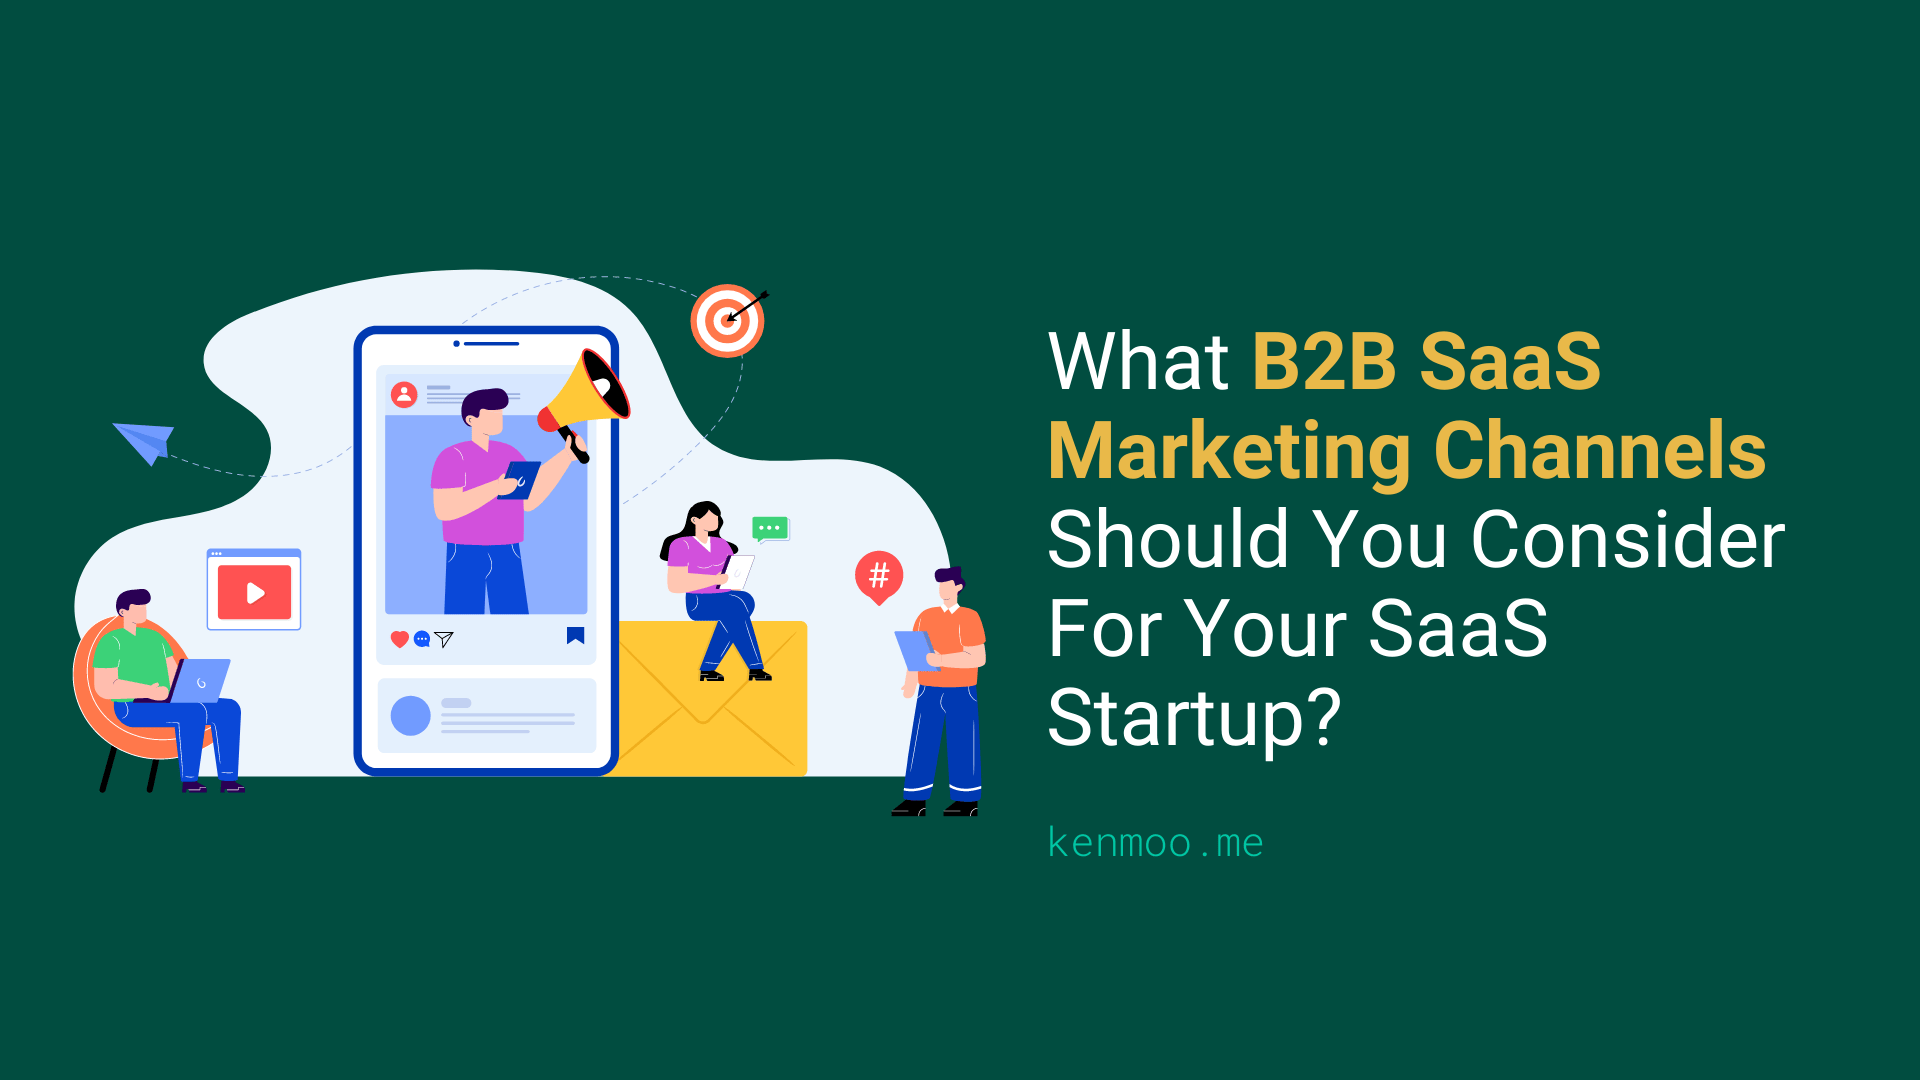 17 B2B SaaS Marketing Channels You Should Consider For Your SaaS Startup